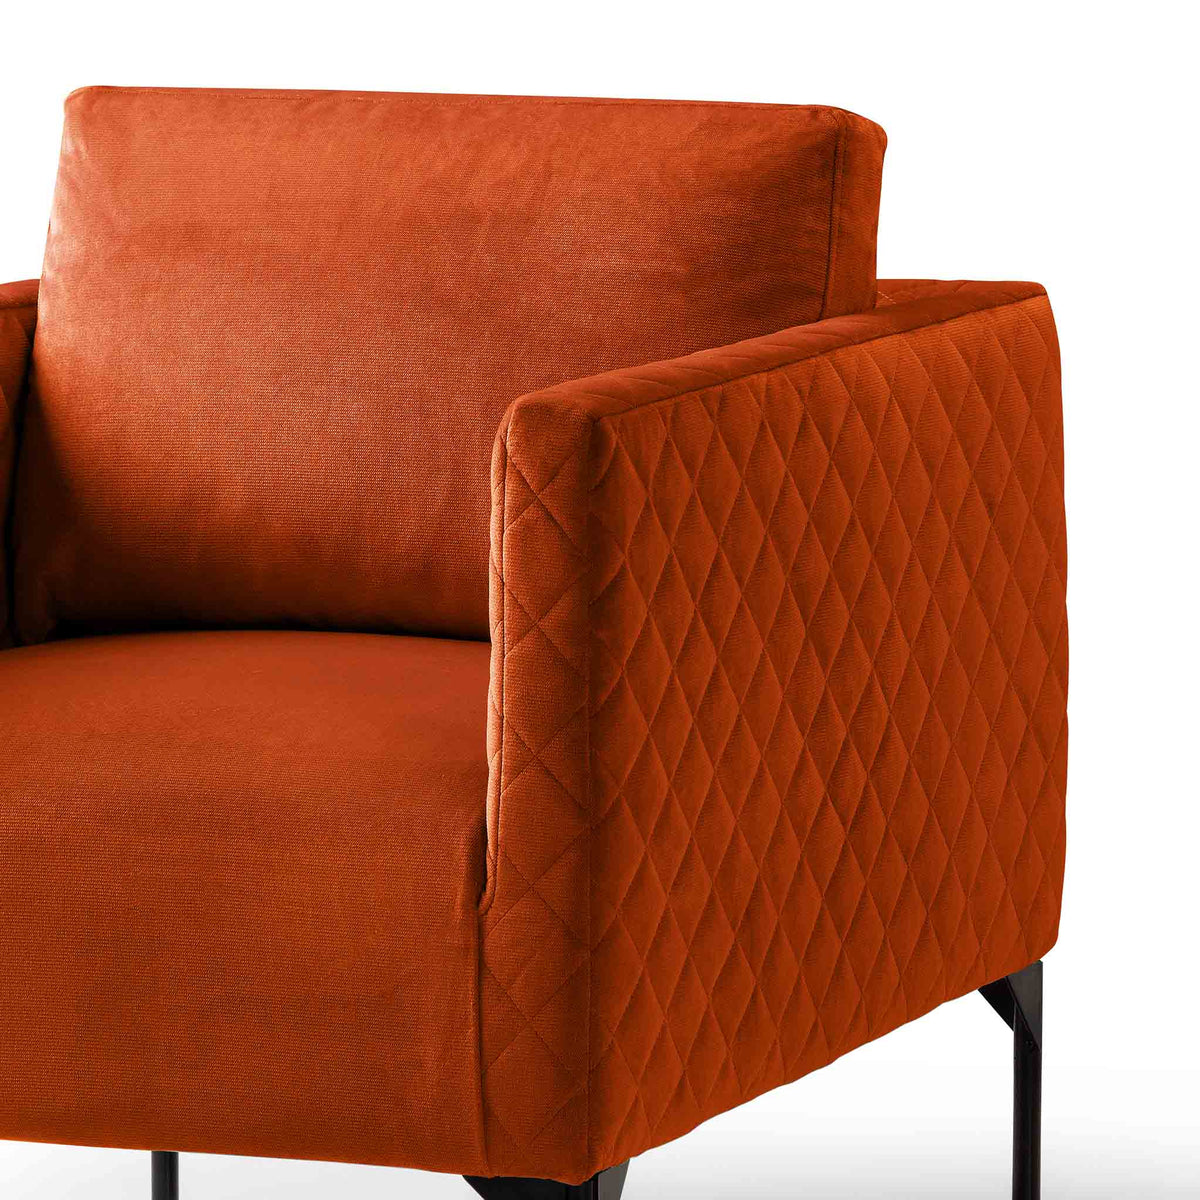 close up of the padded seat and backrest cushion on the Bali Apricot Velvet Accent Chair